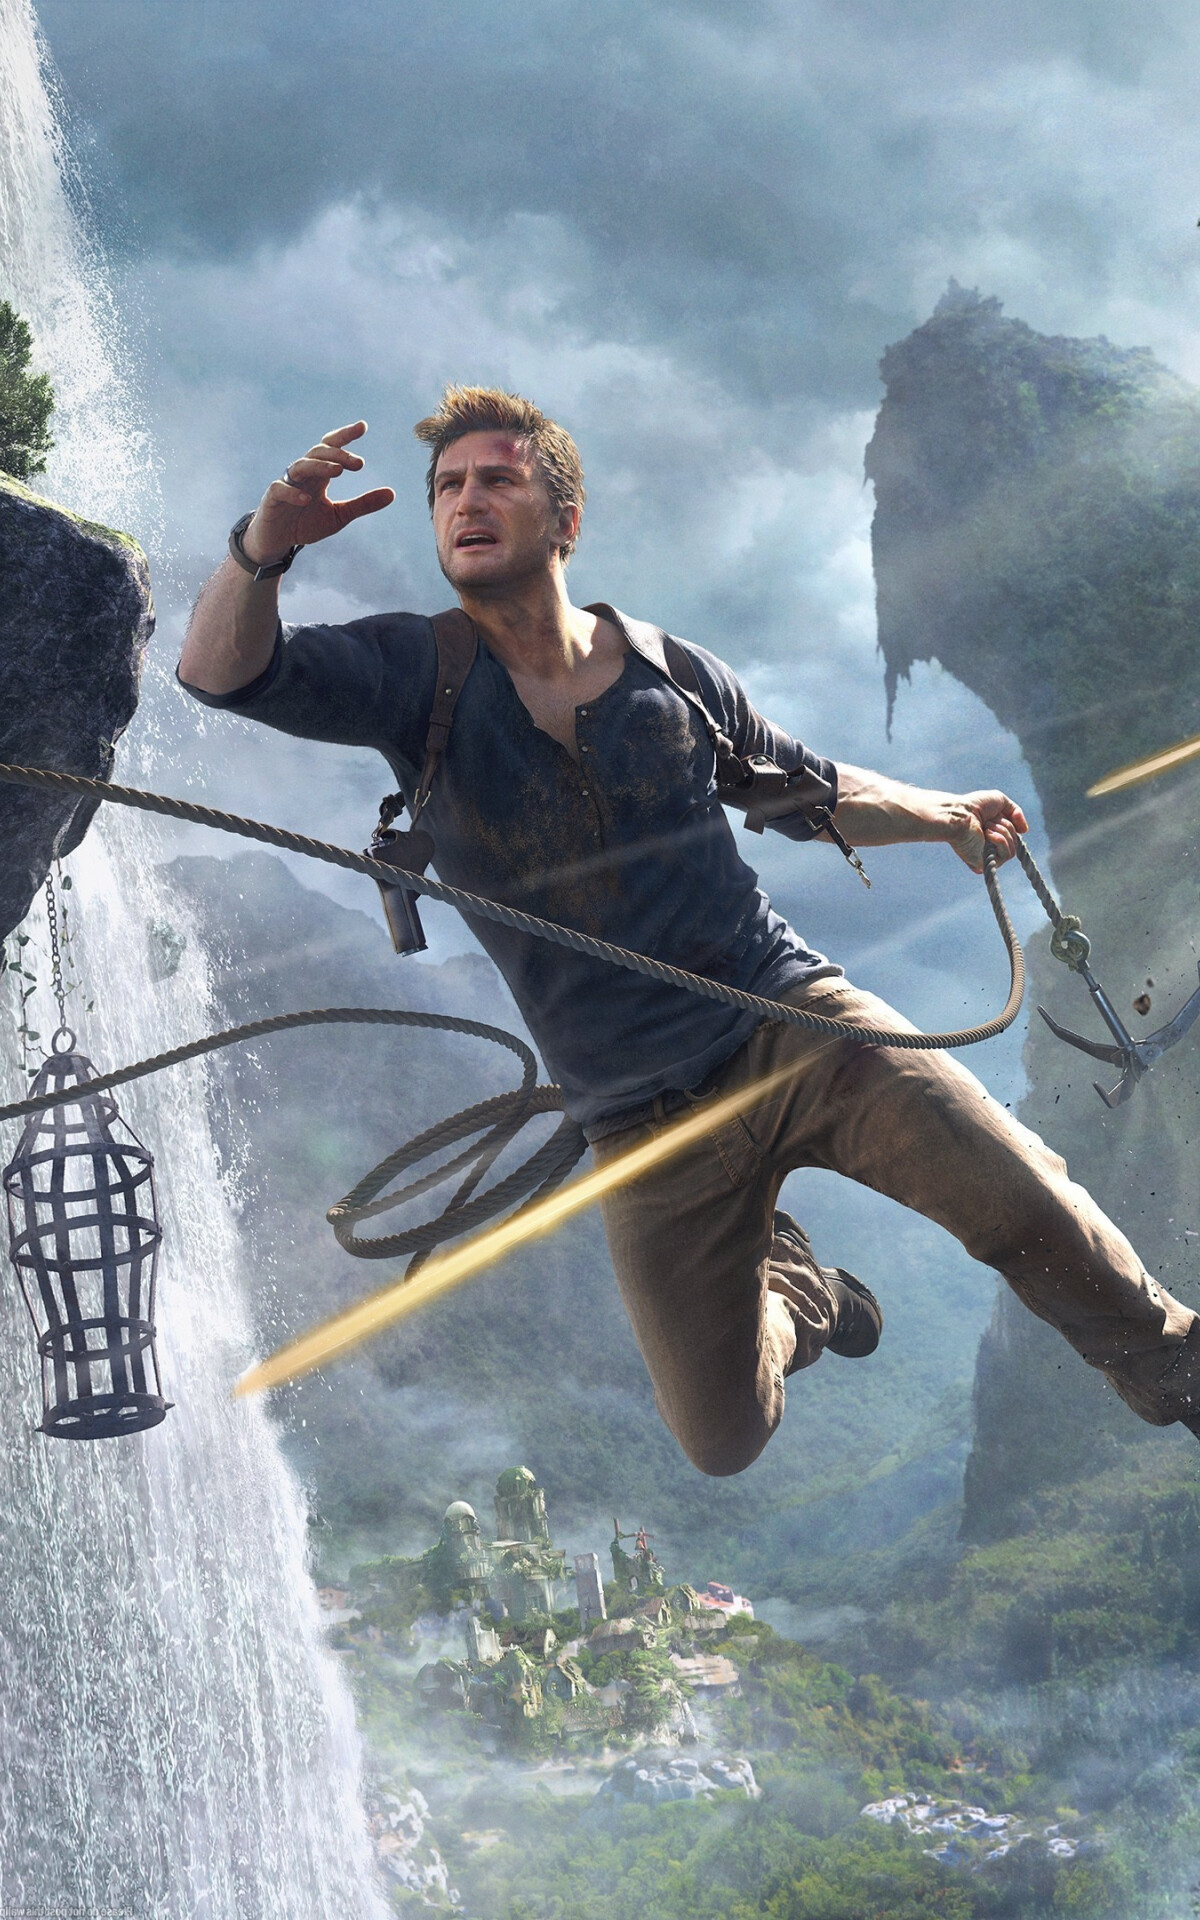 Uncharted: The design and personality of Drake have drawn comparisons to other video game and film characters, such as Lara Croft and Indiana Jones. 1200x1920 HD Wallpaper.